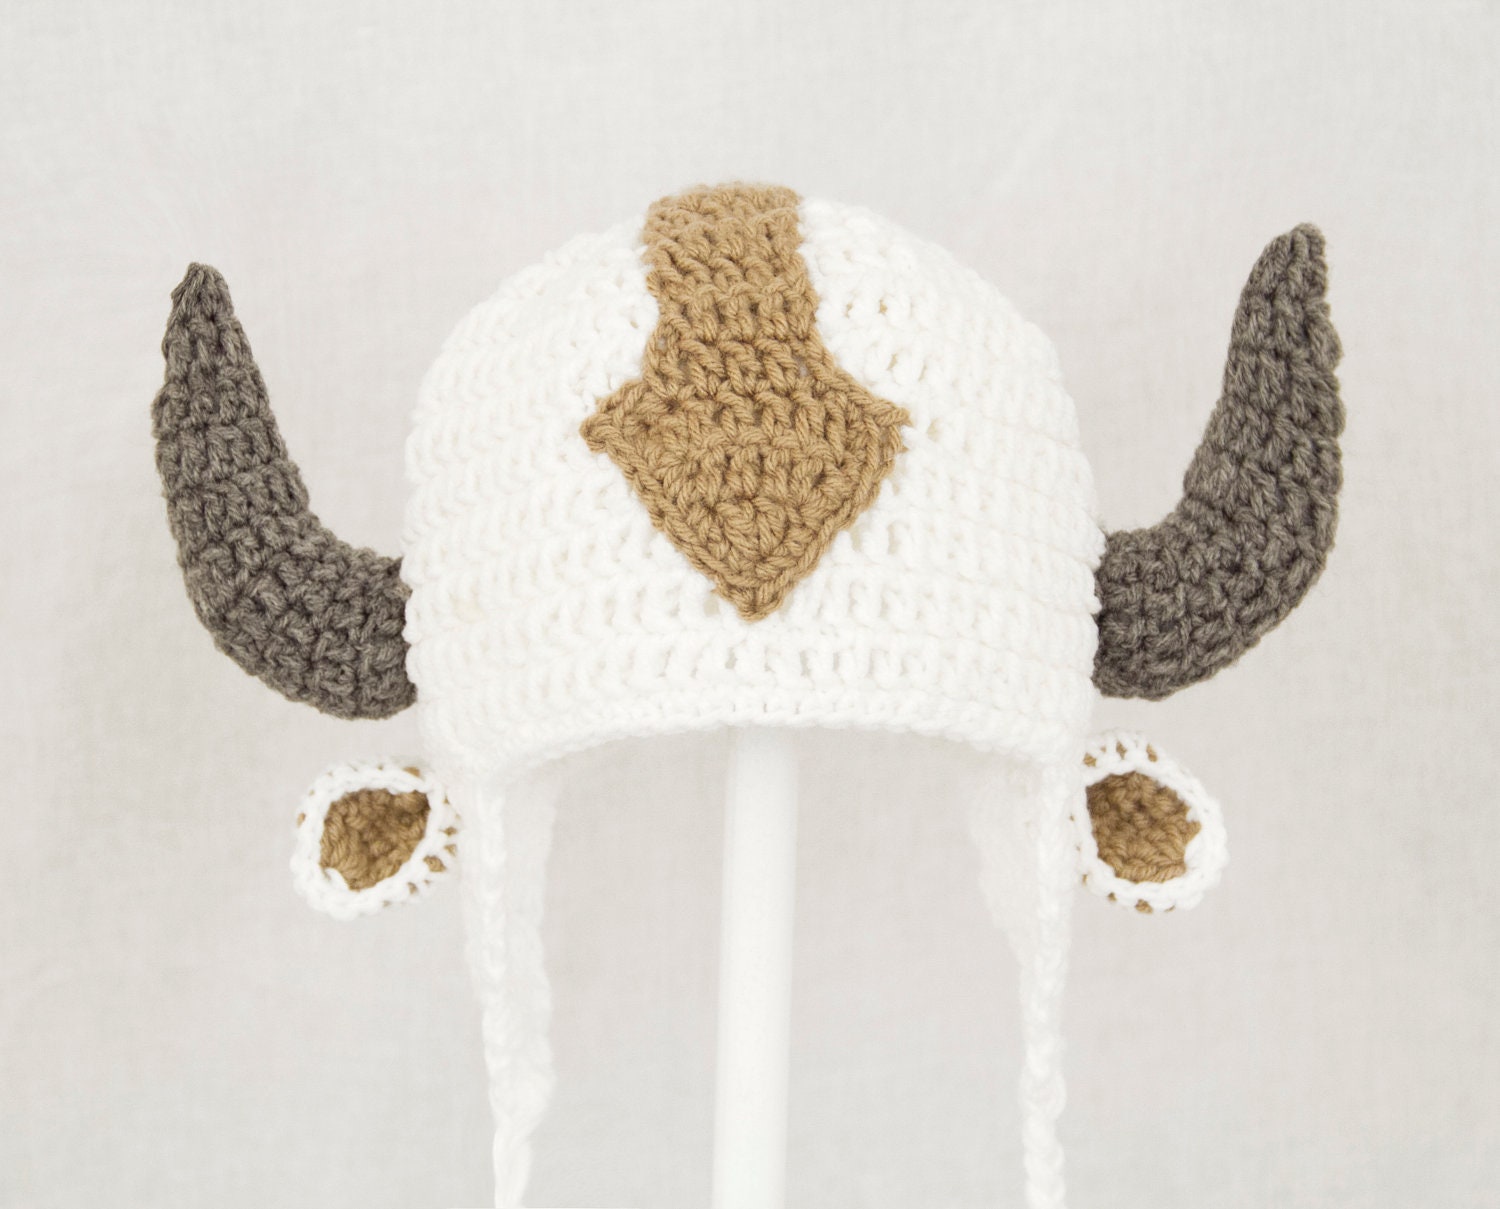 Appa the Flying Bison Earflap Hat from Avatar the Last Airbender, White Crochet Beanie, send size choice baby - adult - GeekinOut